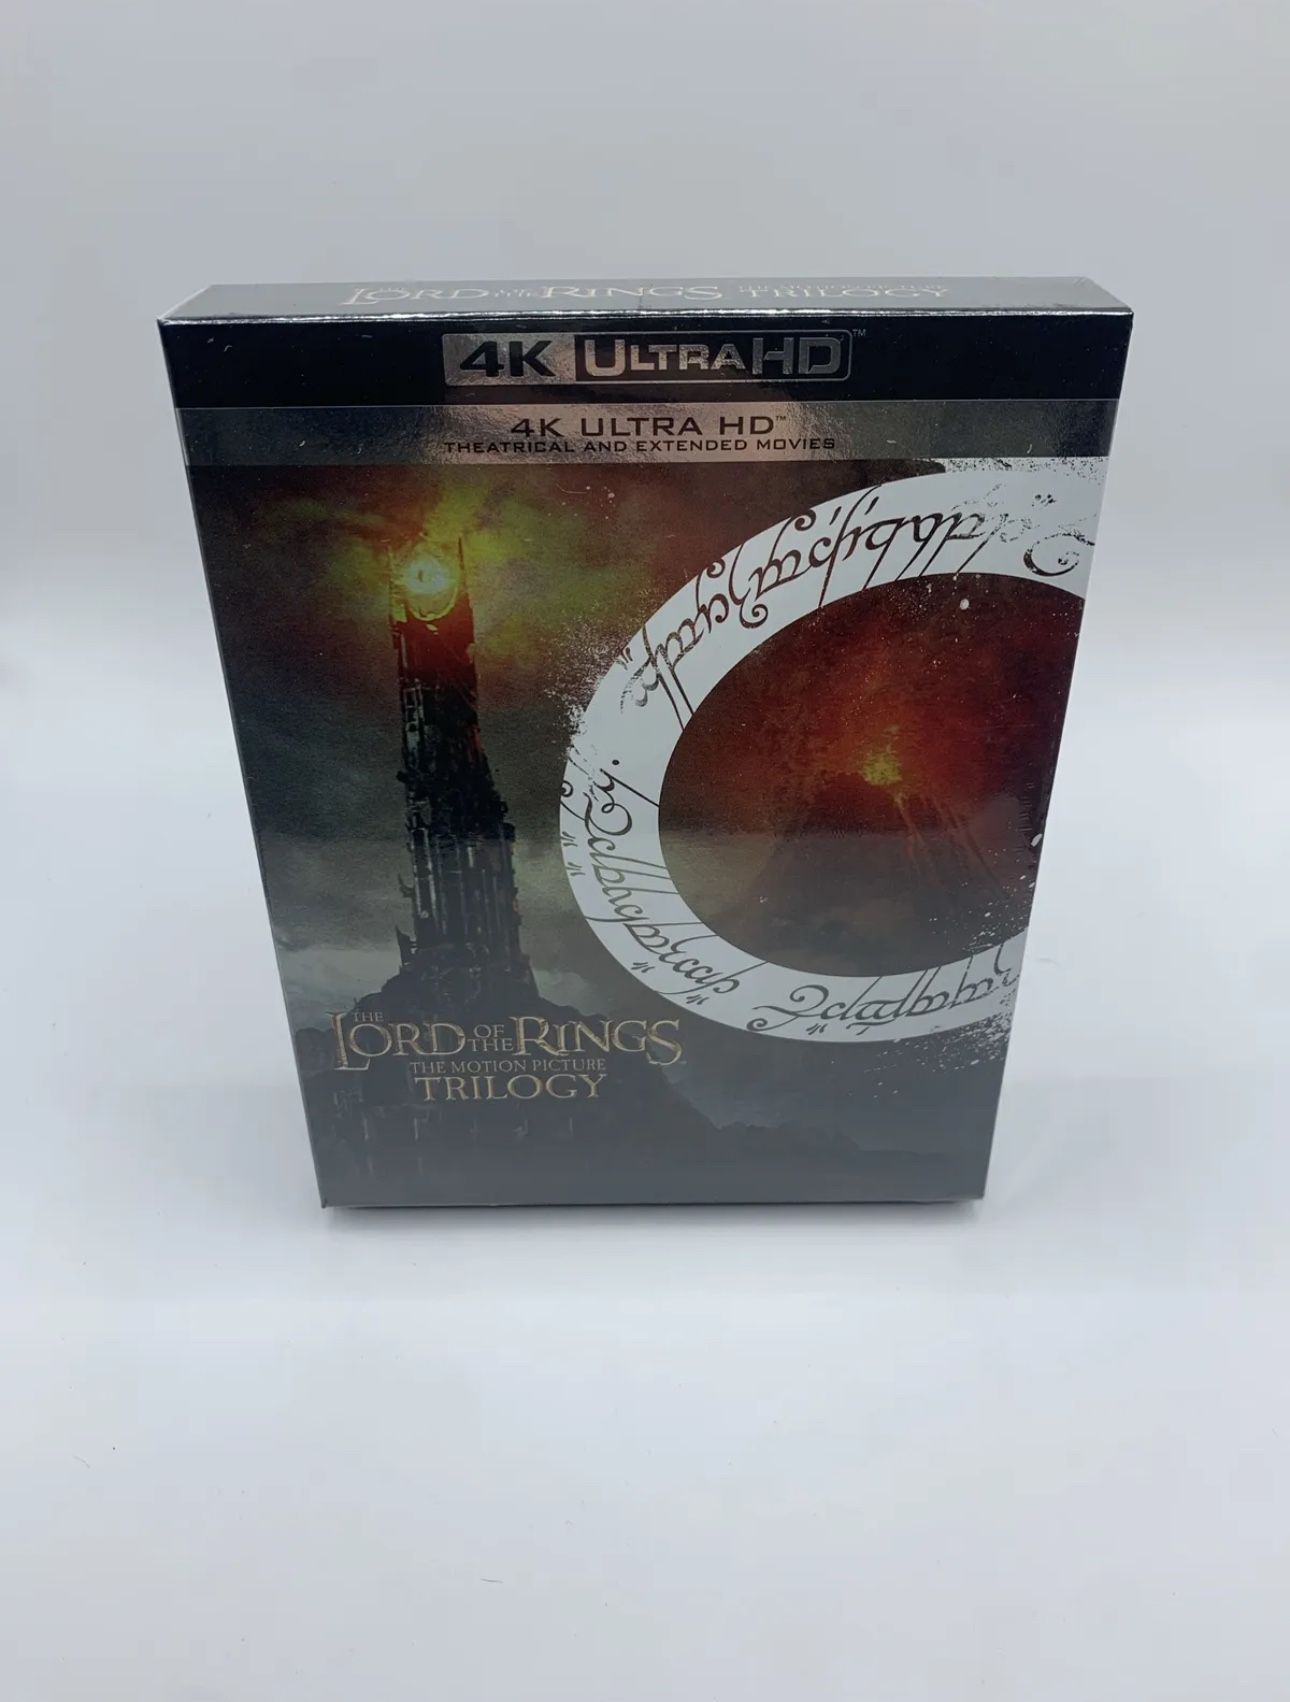 Lord Of The Rings The Motion Picture Trilogy 4K Ultra HD + Digital Code NEW